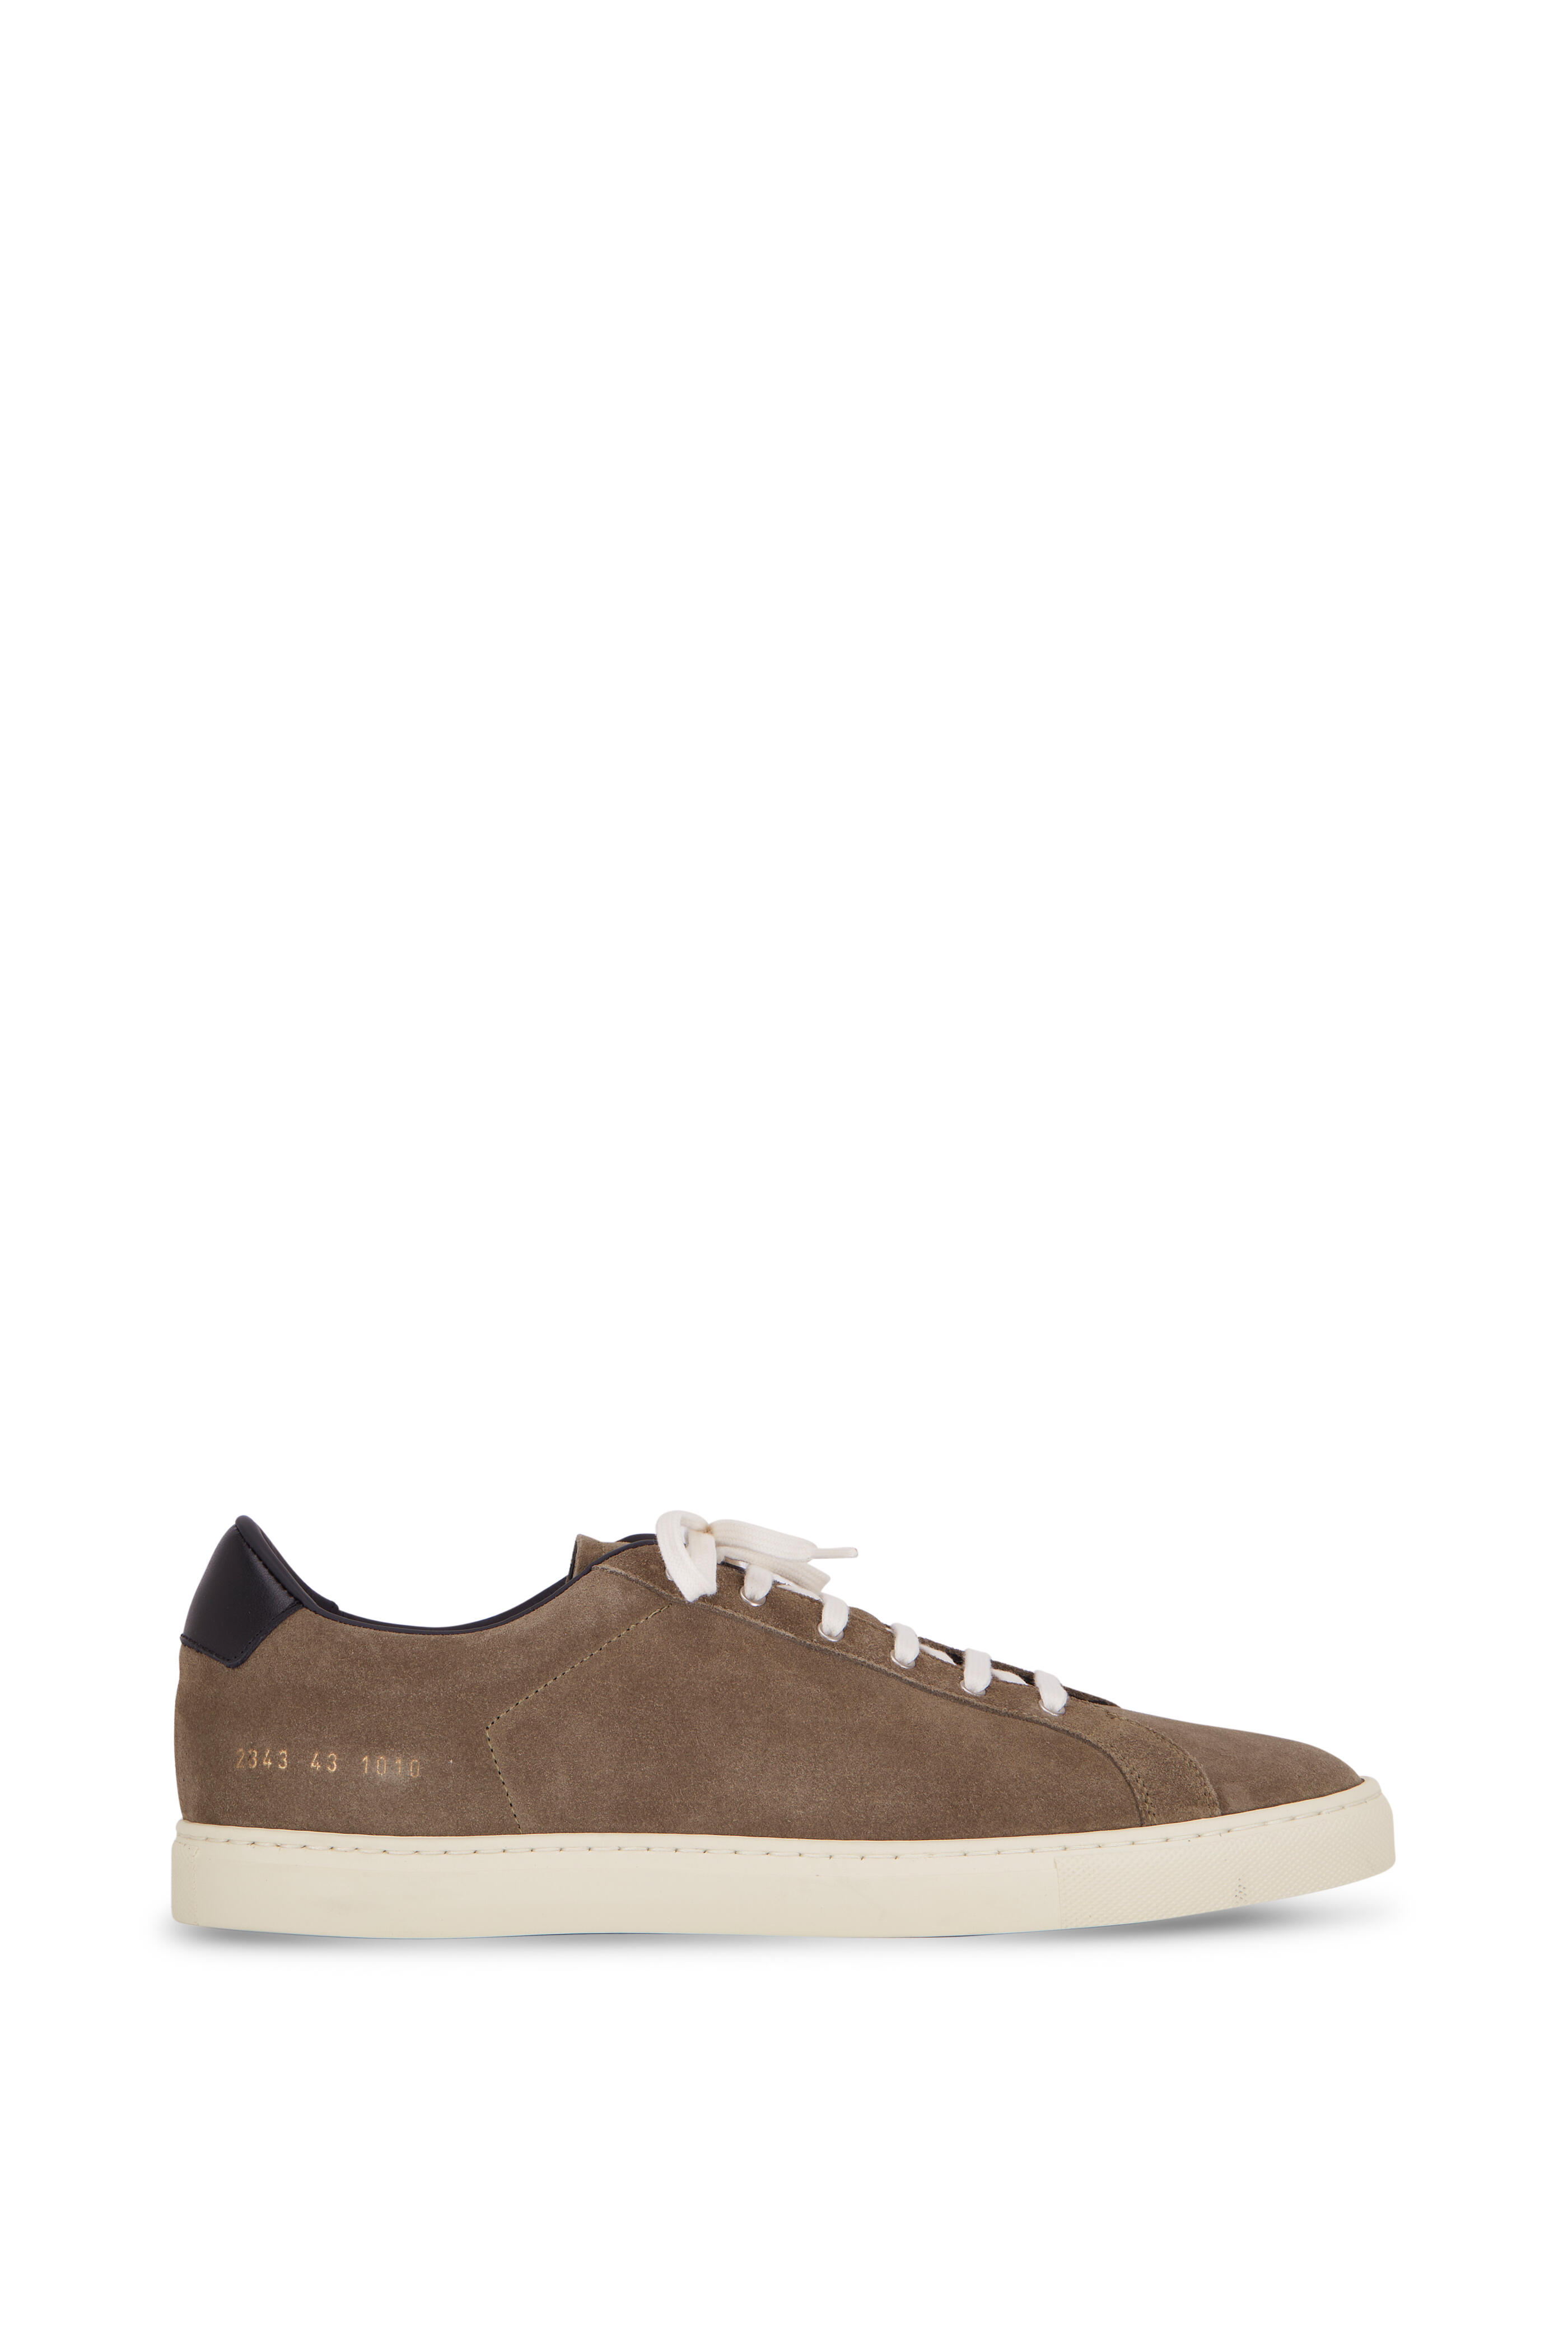 Common Projects - Retro Low Olive Suede Sneaker | Mitchell Stores